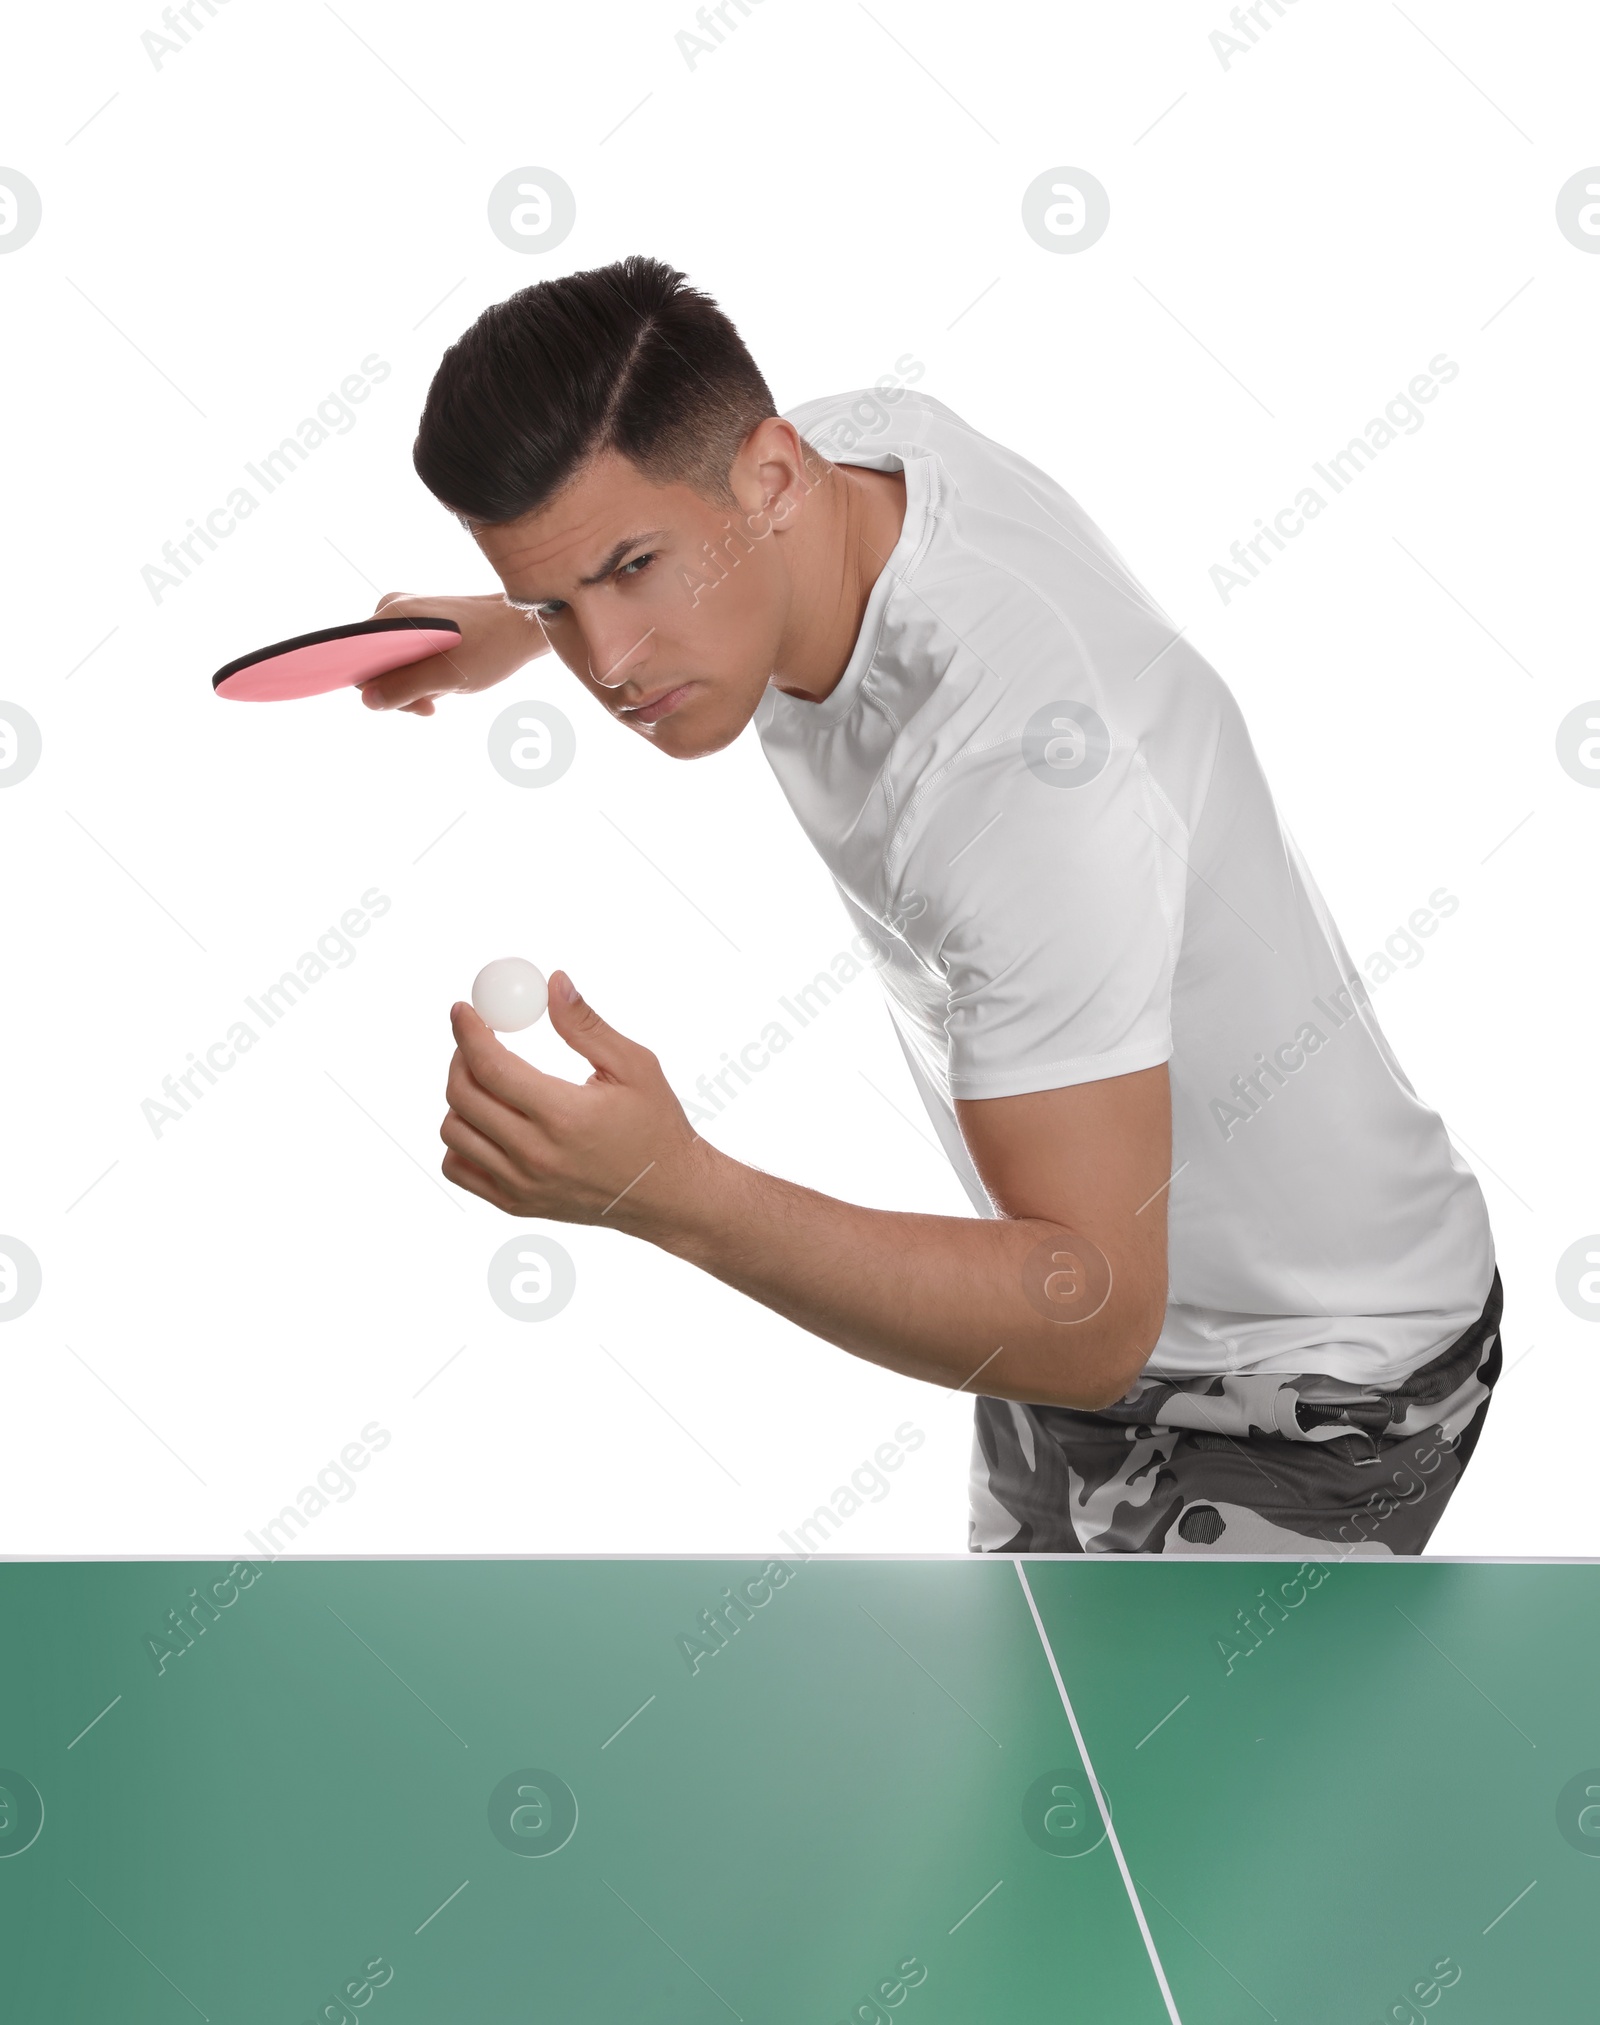 Photo of Handsome man playing ping pong on white background